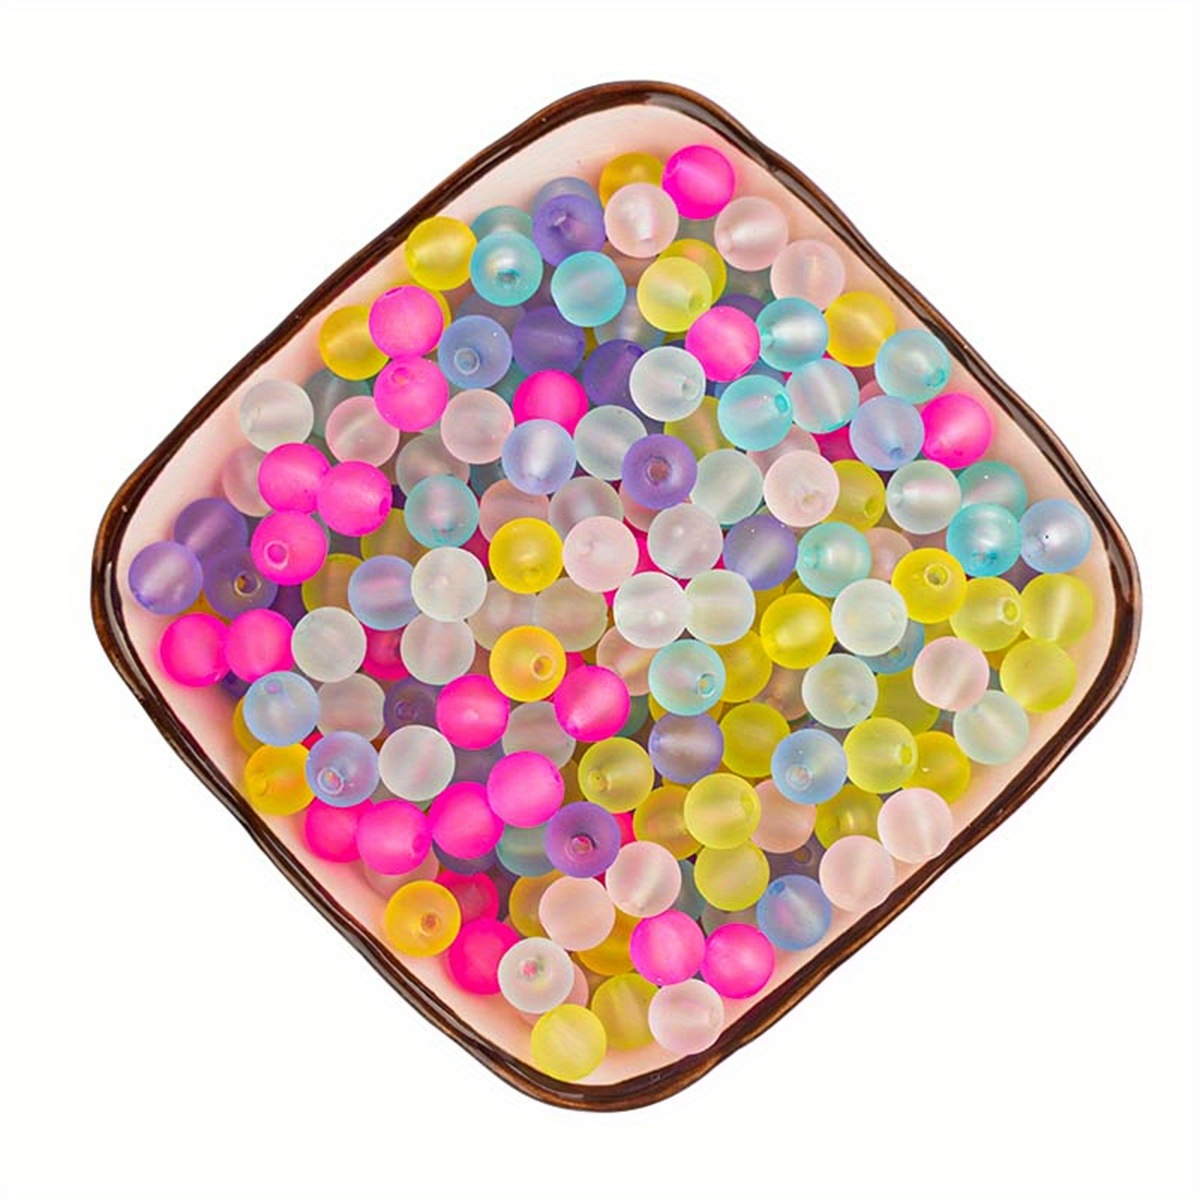 200pcs 8/10mm Acrylic Faceted Beads Medium Beads, Transparent Colorful  Round Loose Beads For DIY Bracelet Beaded Handmade DIY Jewelry Accessories